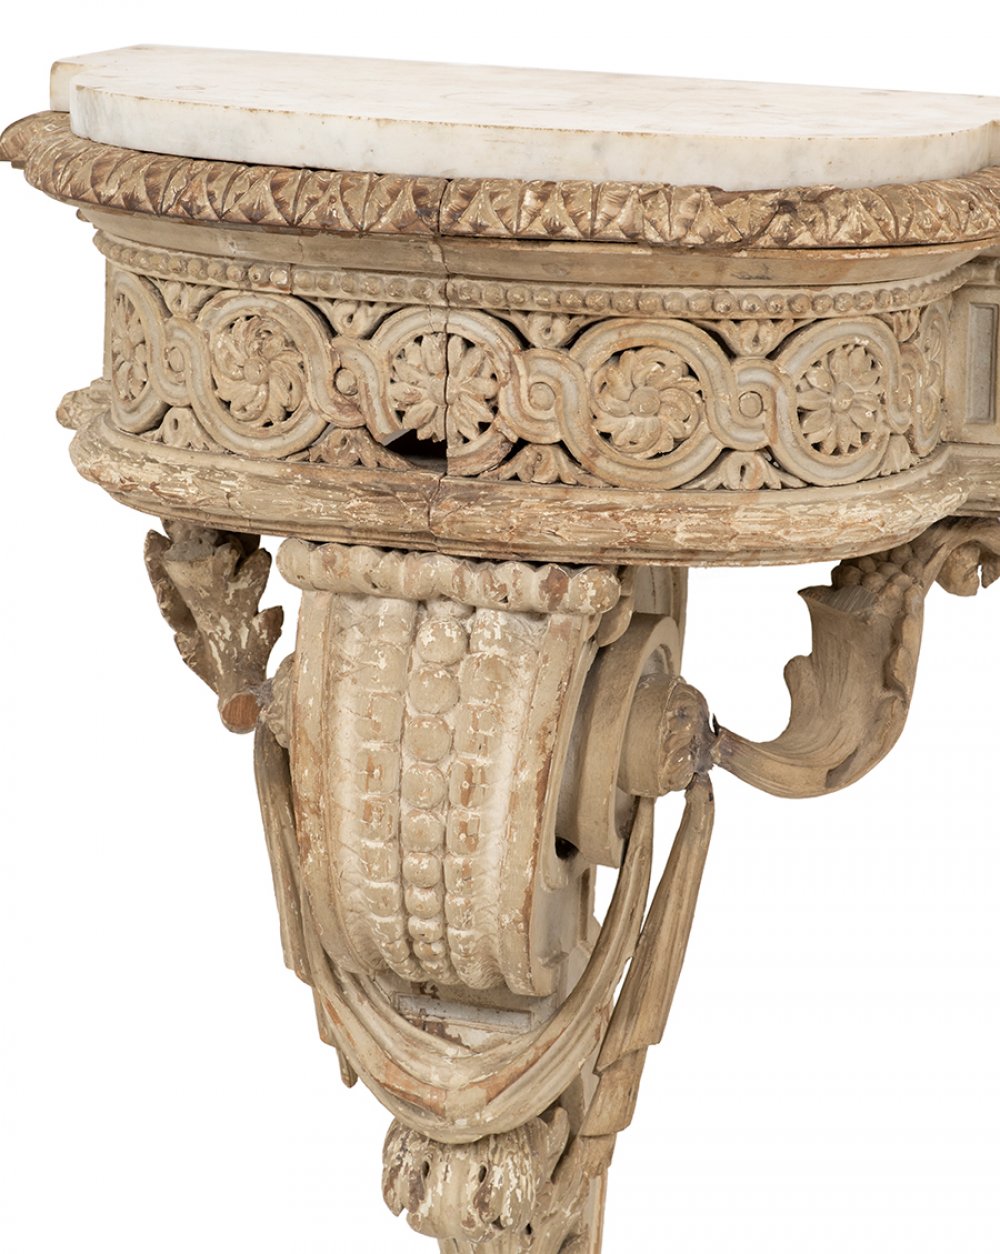 Louis XVI console; France, late 18th century.Carved and polychrome wood. White marble top.It - Image 5 of 6